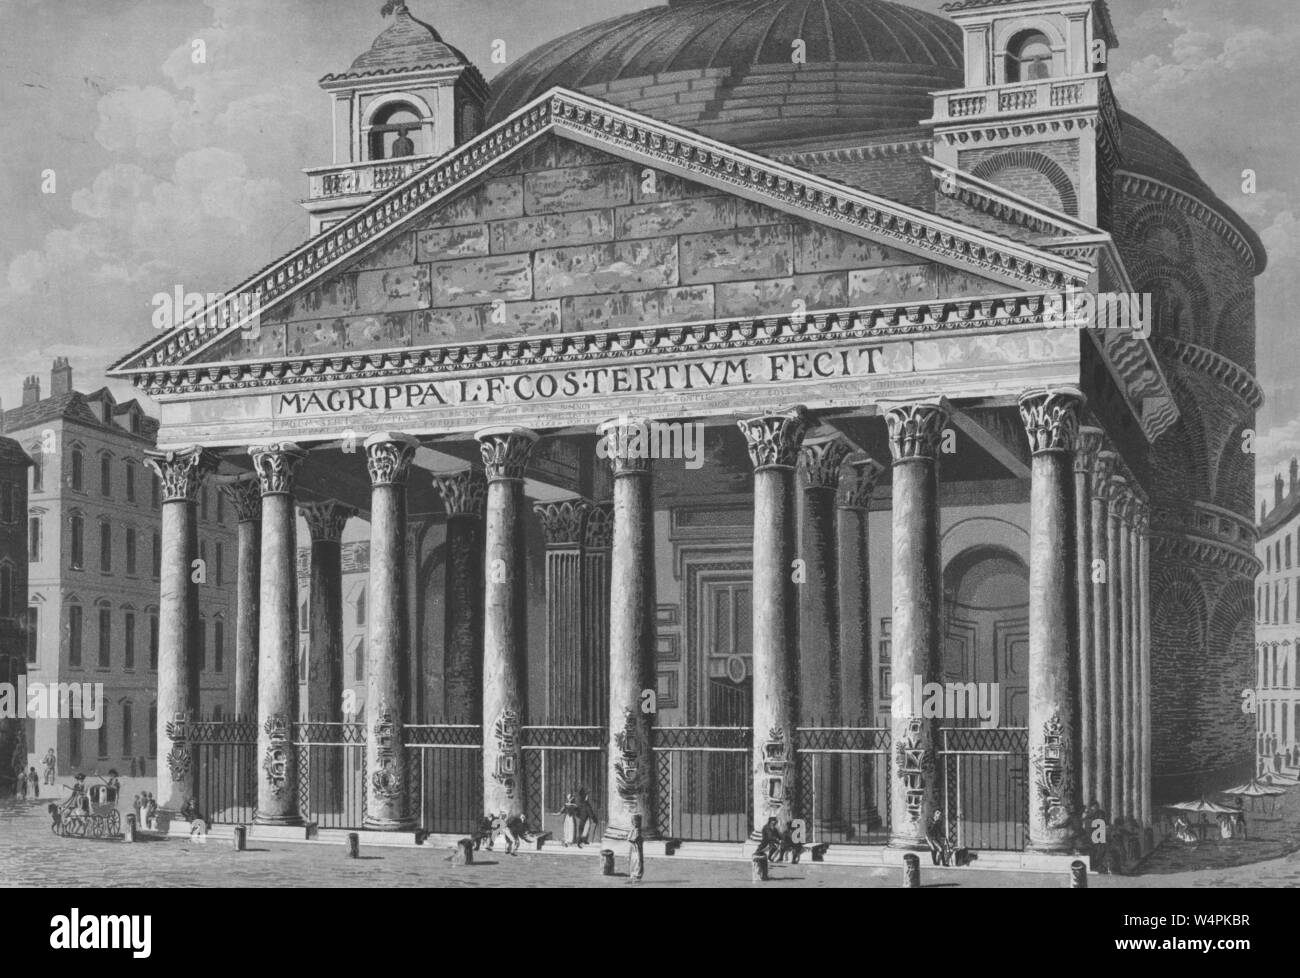 Engraving of the Pantheon in Rome, Italy, 'Temple of all the Gods', from the book 'Pantheon Egyptien' by Leon Jean Joseph Dubois, 1820. From the New York Public Library. () Stock Photo